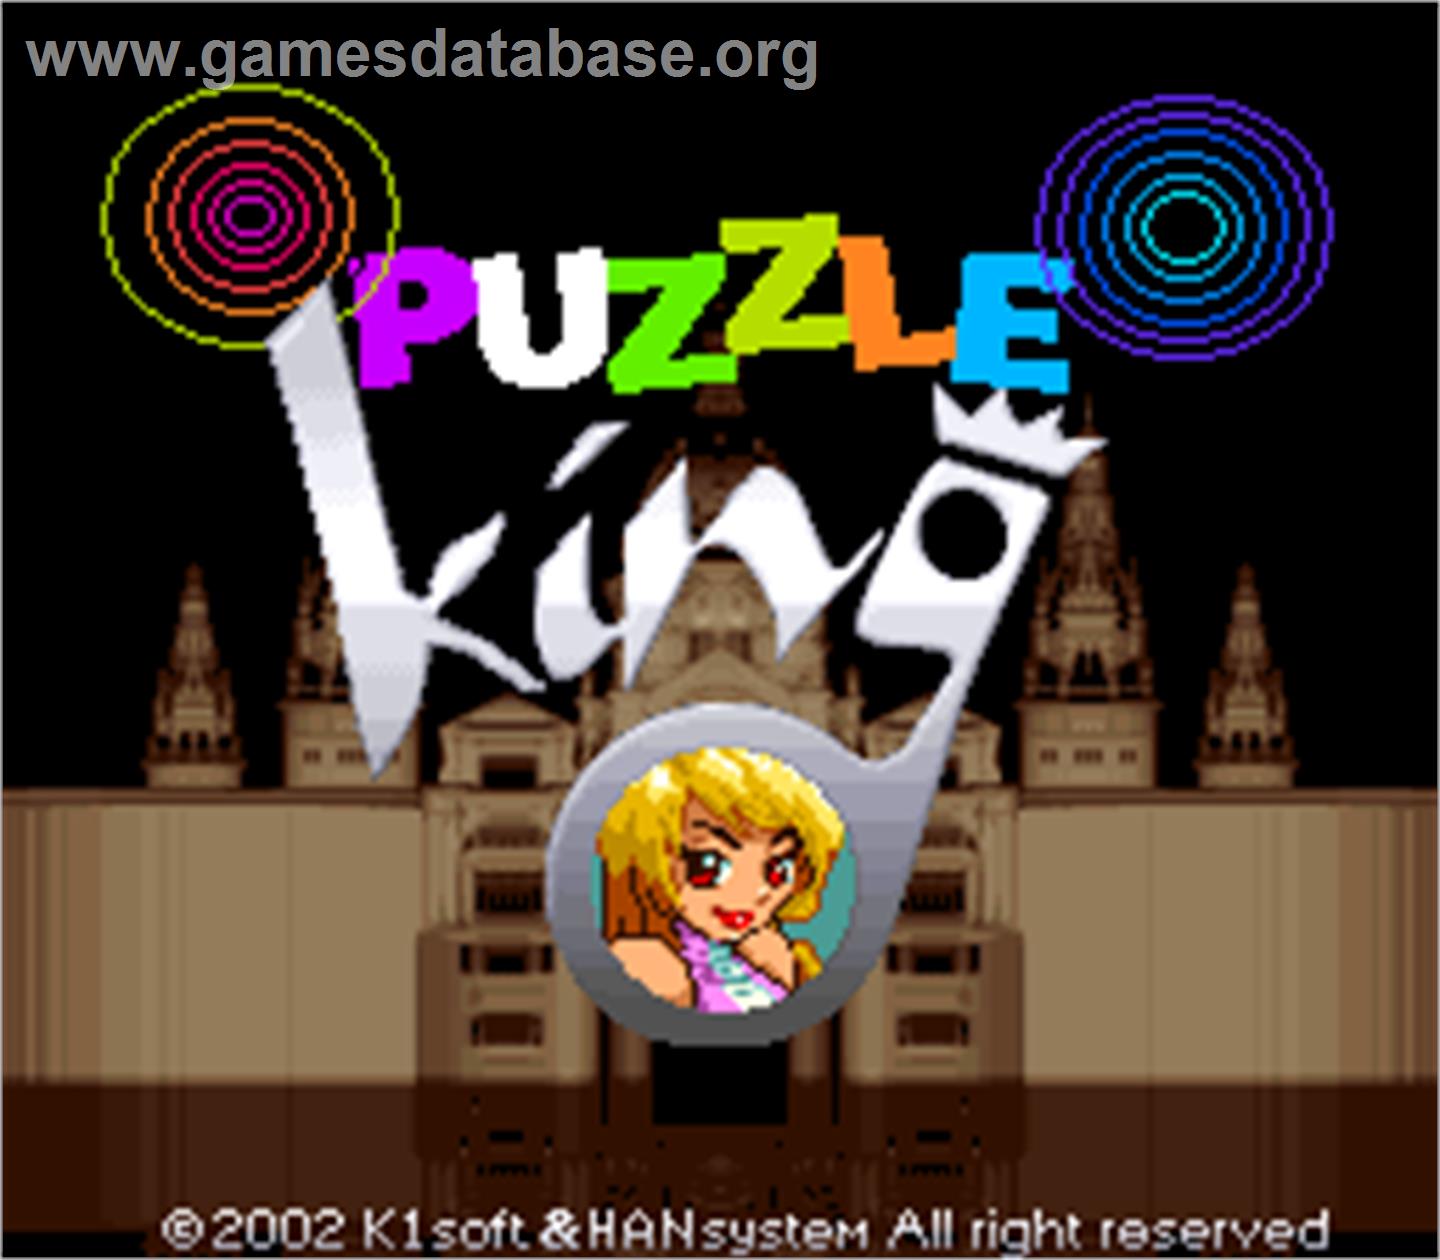 Puzzle King - Arcade - Artwork - Title Screen